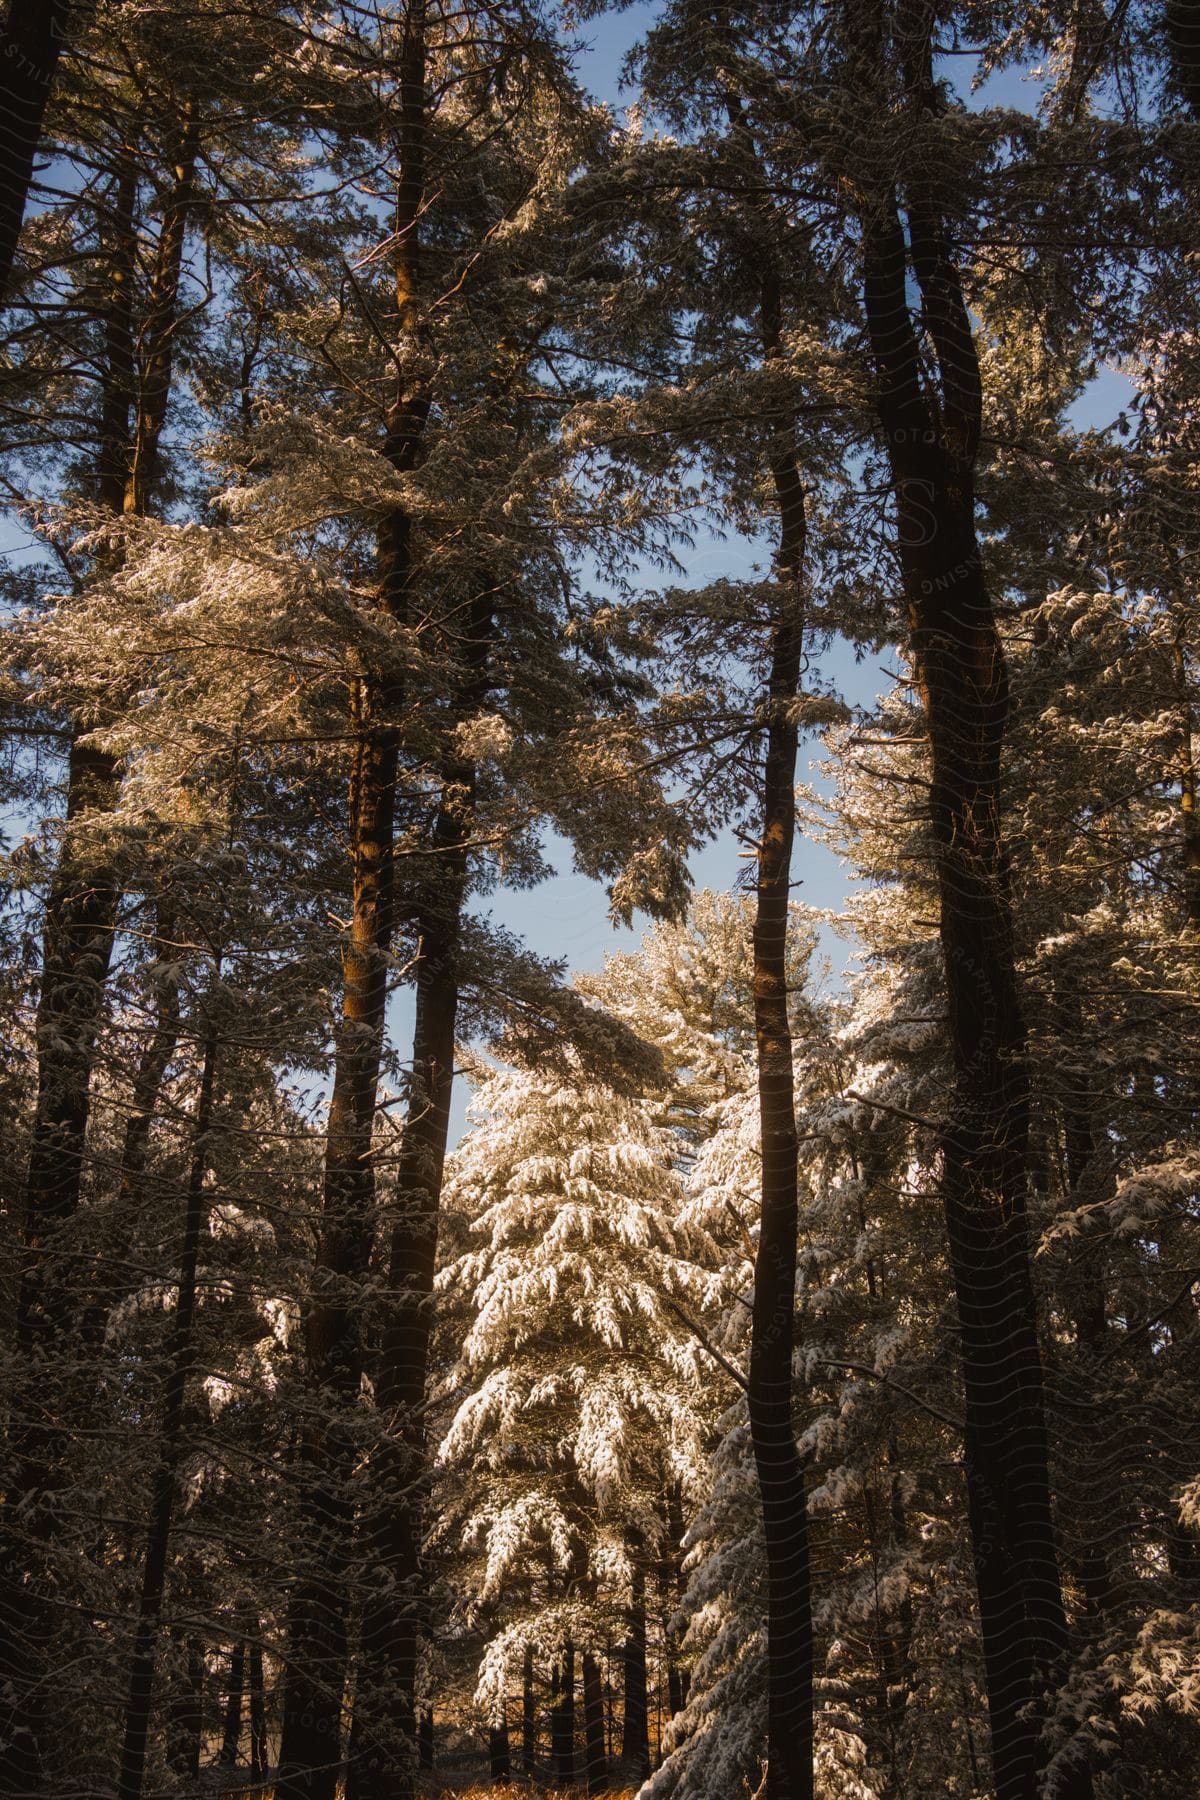 A winter forest with tall trees draped in a blanket of snow.